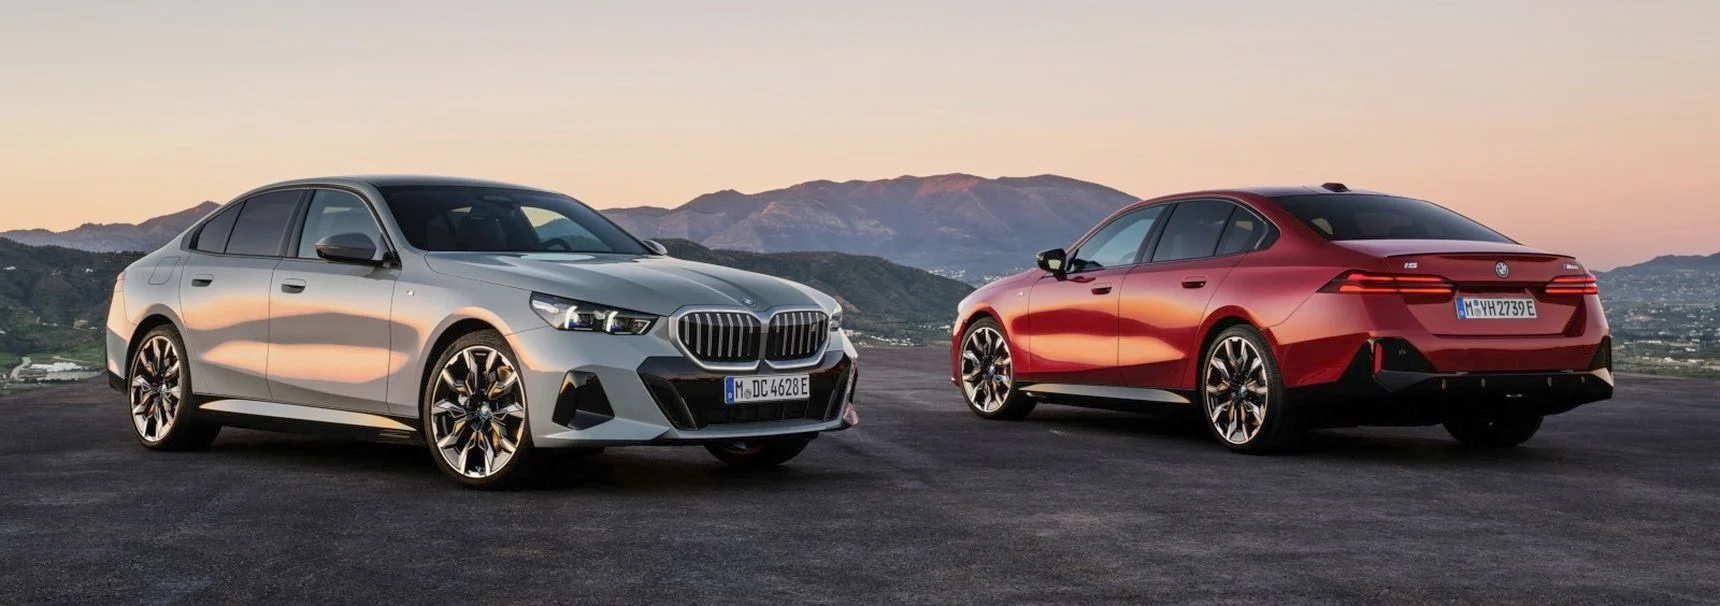 The new BMW 5 Series and i5